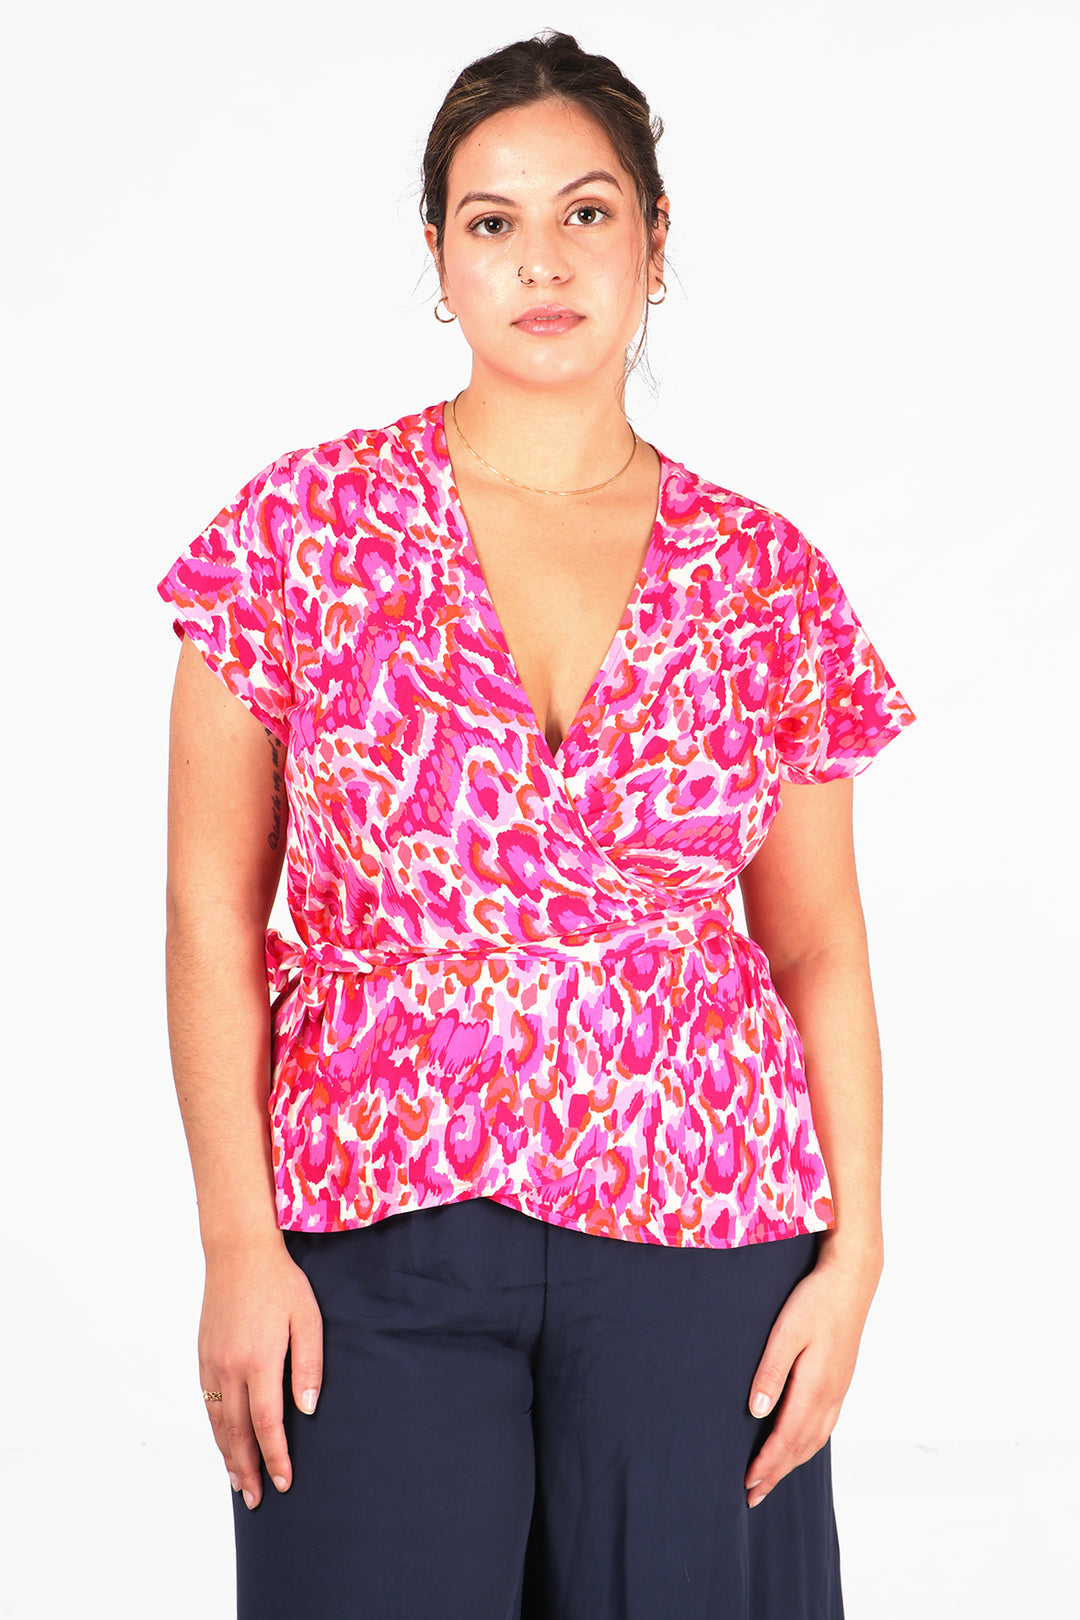 model wearing a pink abstract print wrap top with short angel sleeves and a v neck